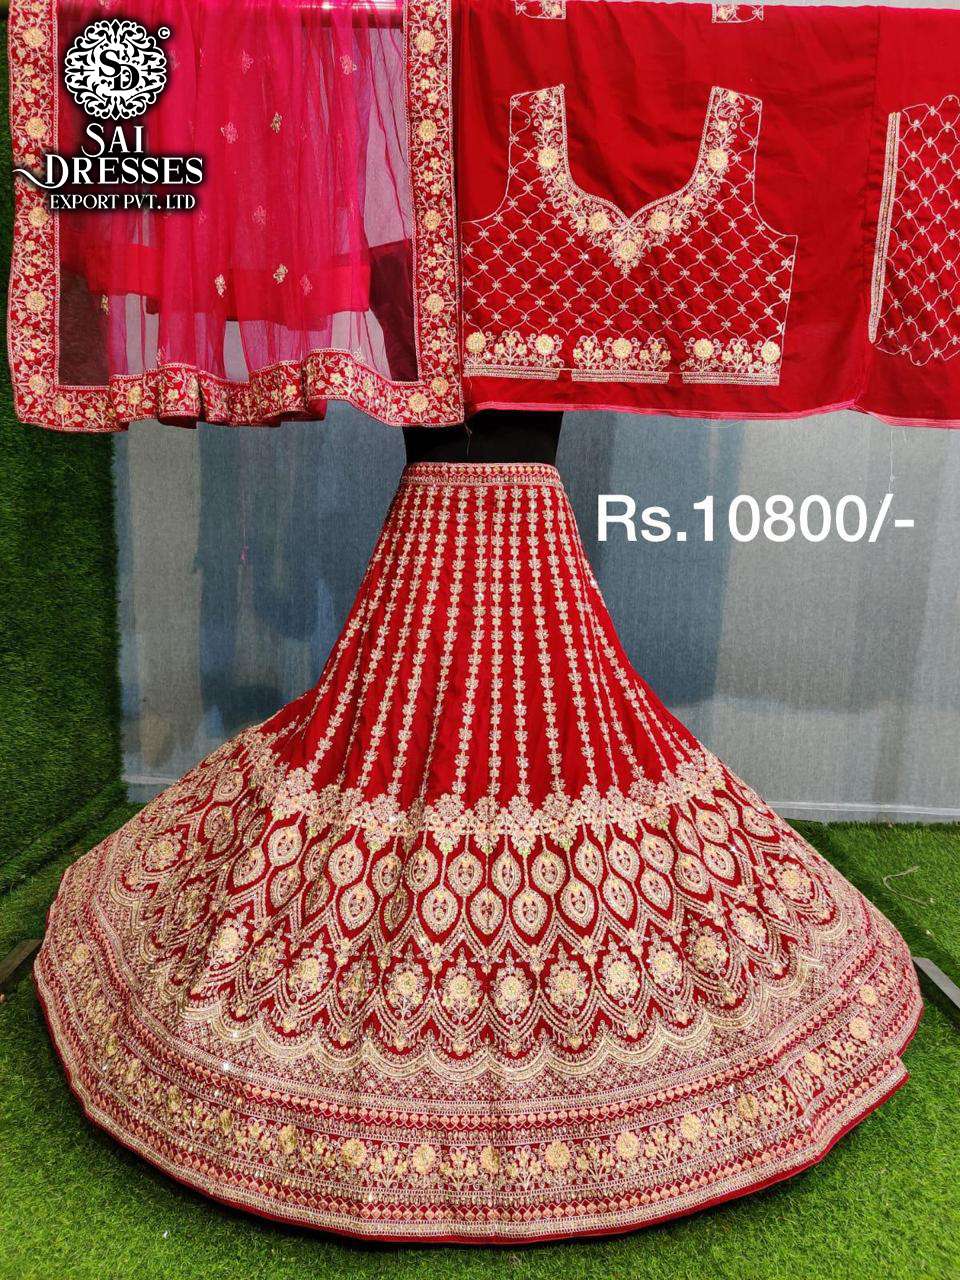 SAI DRESSES PRESENT INDIAN WEDDING WEAR TRADITIONAL DESIGNER LEHENGA COLLECTION IN WHOLESALE RATE IN SURAT